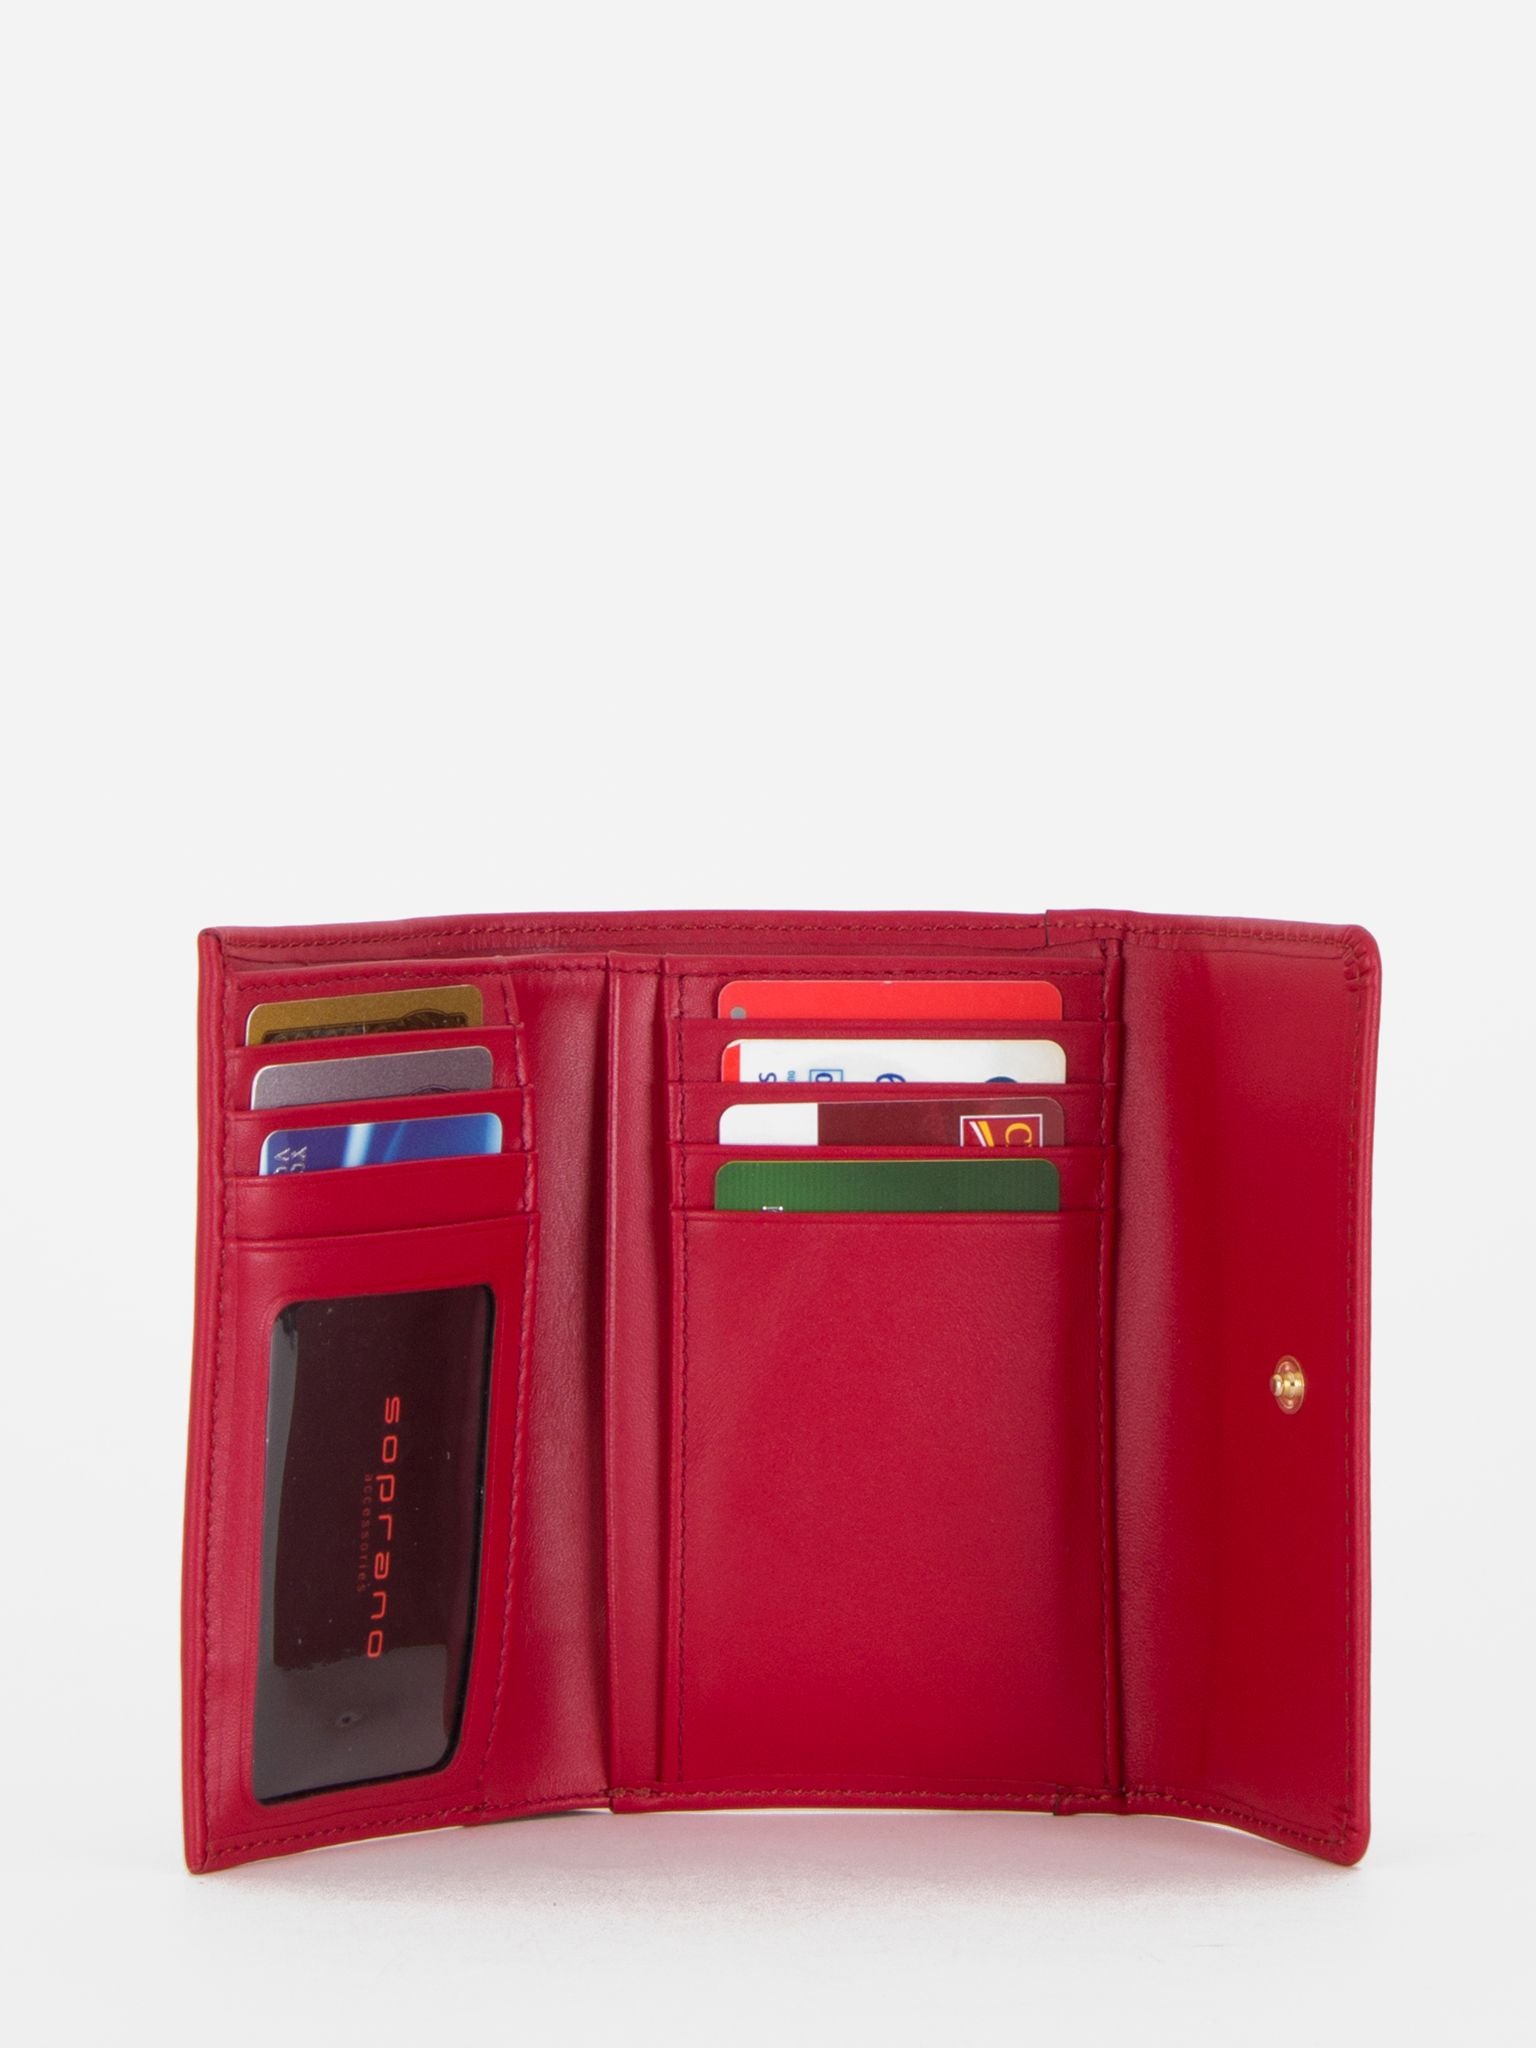 Phoebe Medium Trifold Wallet - Red